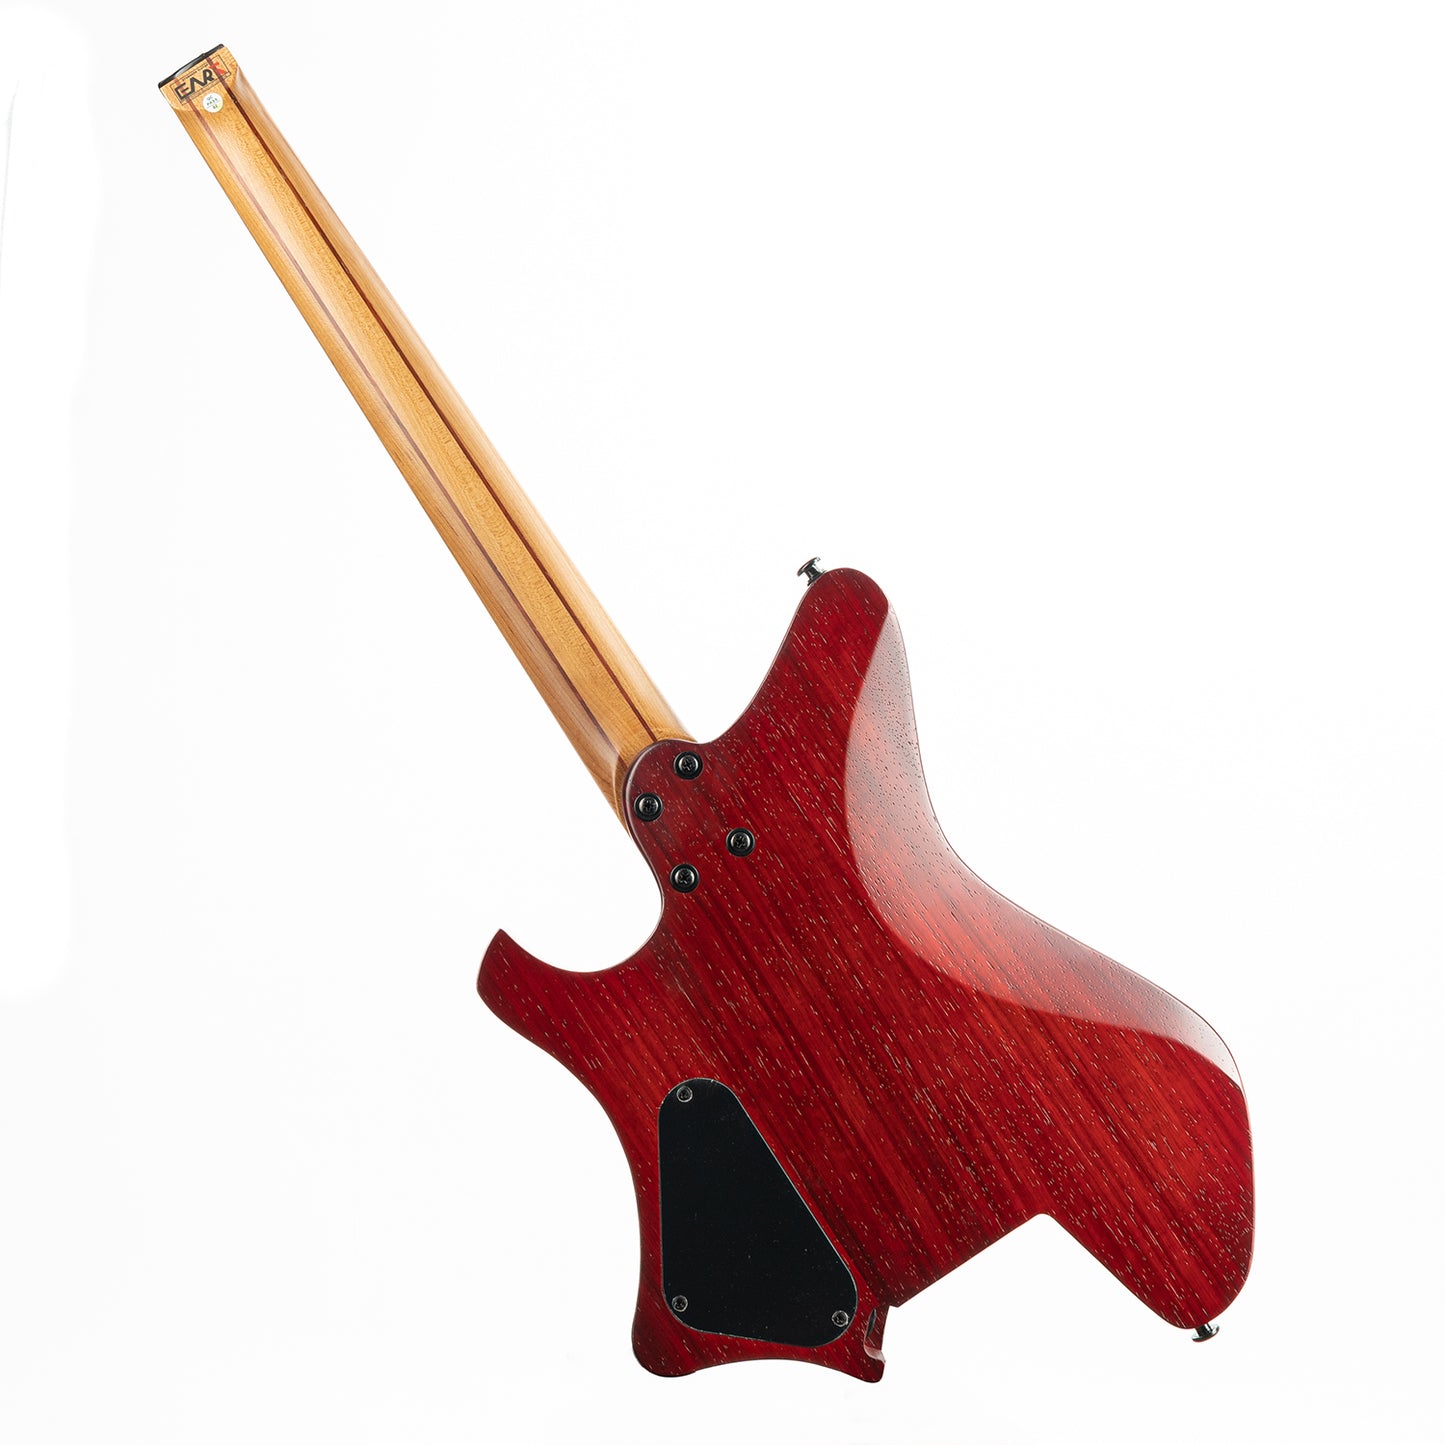 Eart Guitars, GW2 Headless Electric Guitars, Solid Right Handed Model Satin Finish, 3-Way Switch,1 Tone,1 Volume, Natural